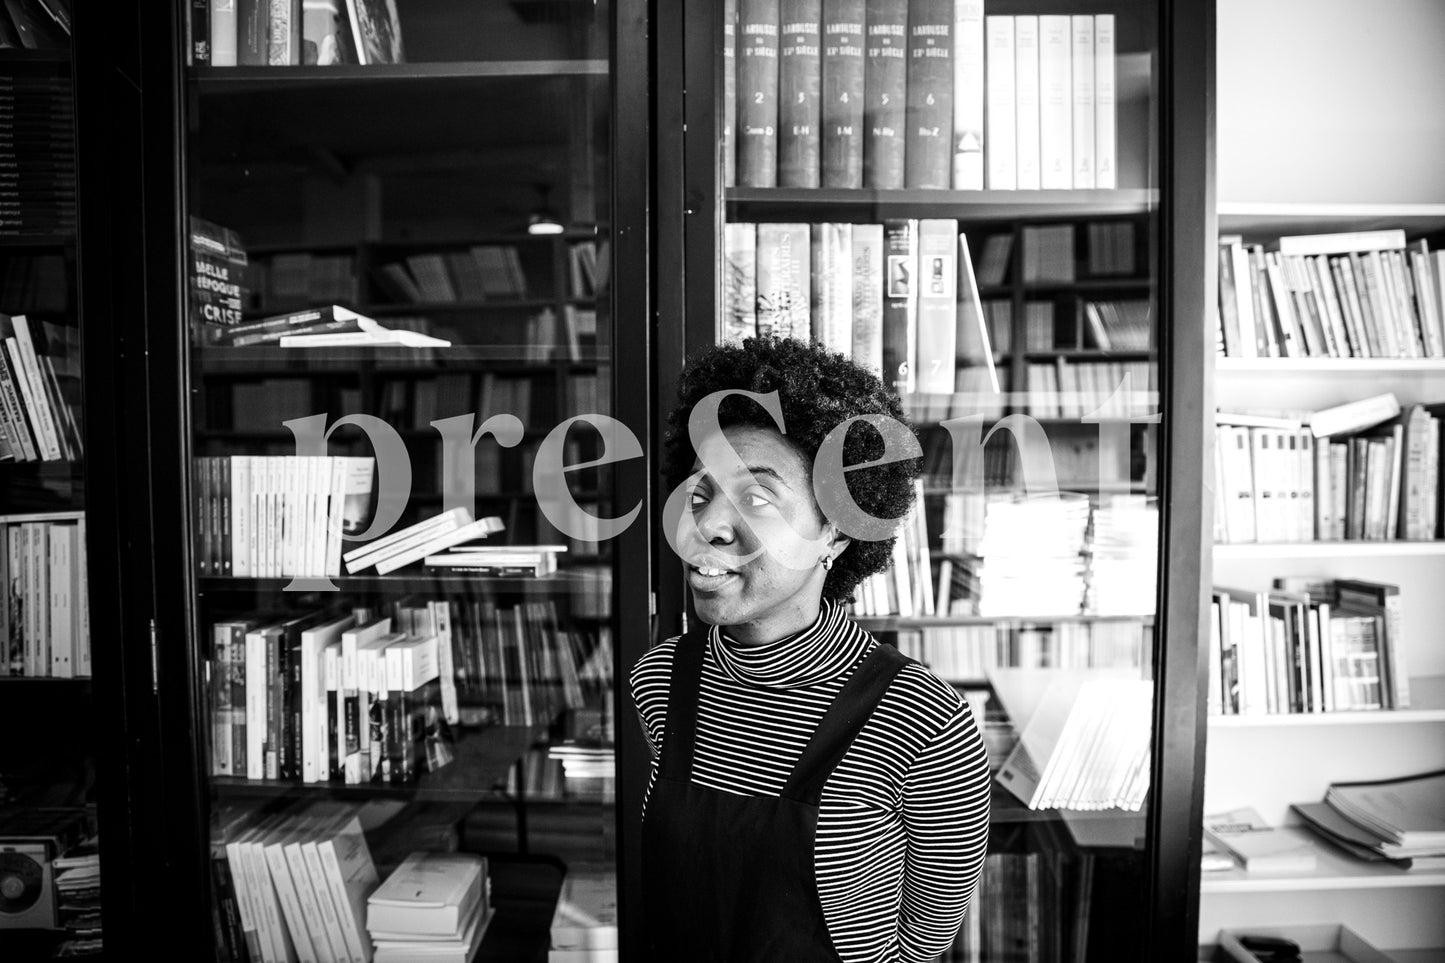 Portrait of someone in a library